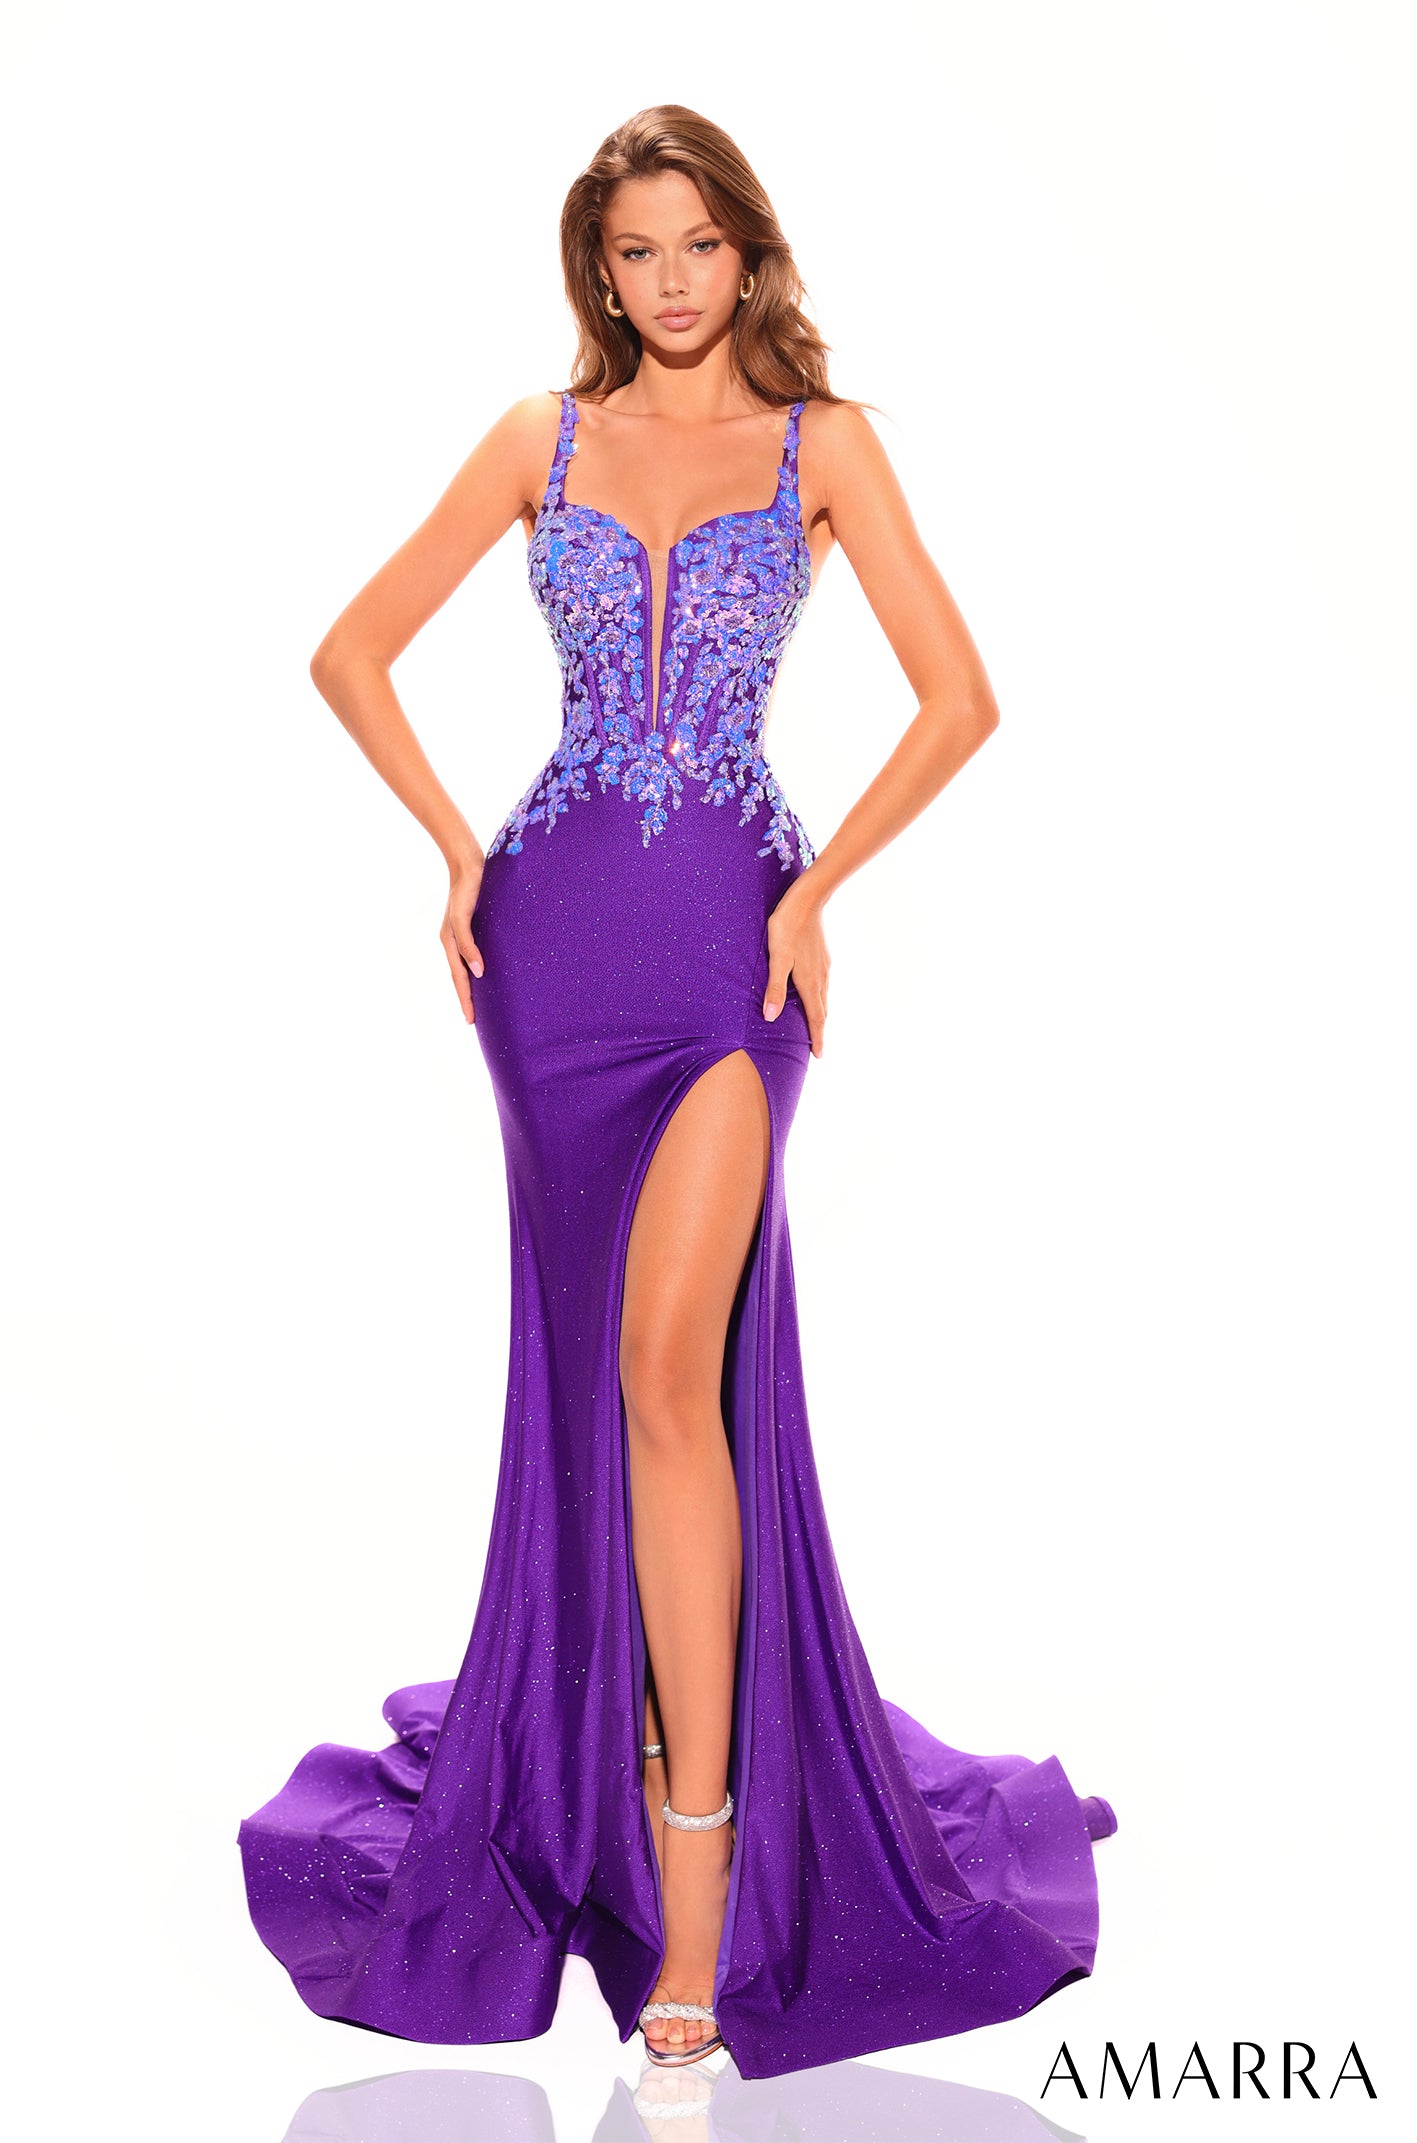 Elevate your formal attire with the Amarra 88759 Prom Dress. This stunning gown features a long, shimmering silhouette with a sheer sequin design and a backless corset for a touch of glamour. Perfect for any formal event, this dress is sure to make a statement and turn heads. Exude confidence and elegance in the Amarra 88759. 